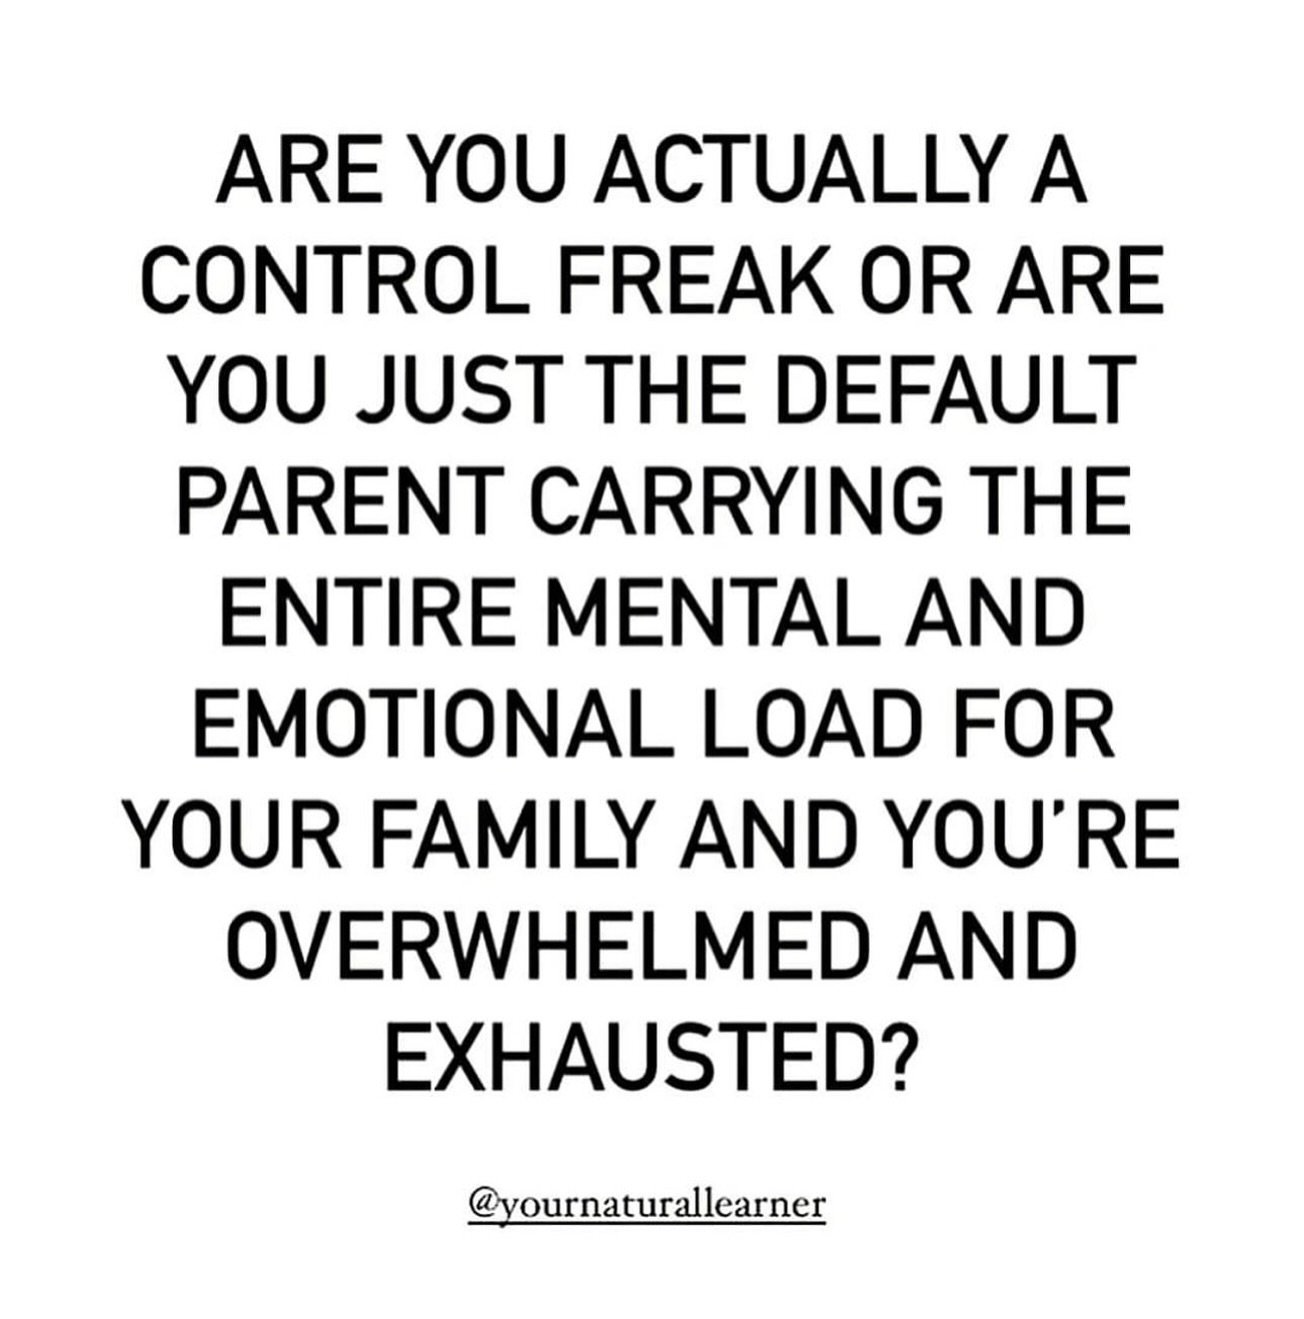 Monday food for thought. 

#mentalload #momlife #motherhood #parenting #parents #mothering #momssupportingmoms